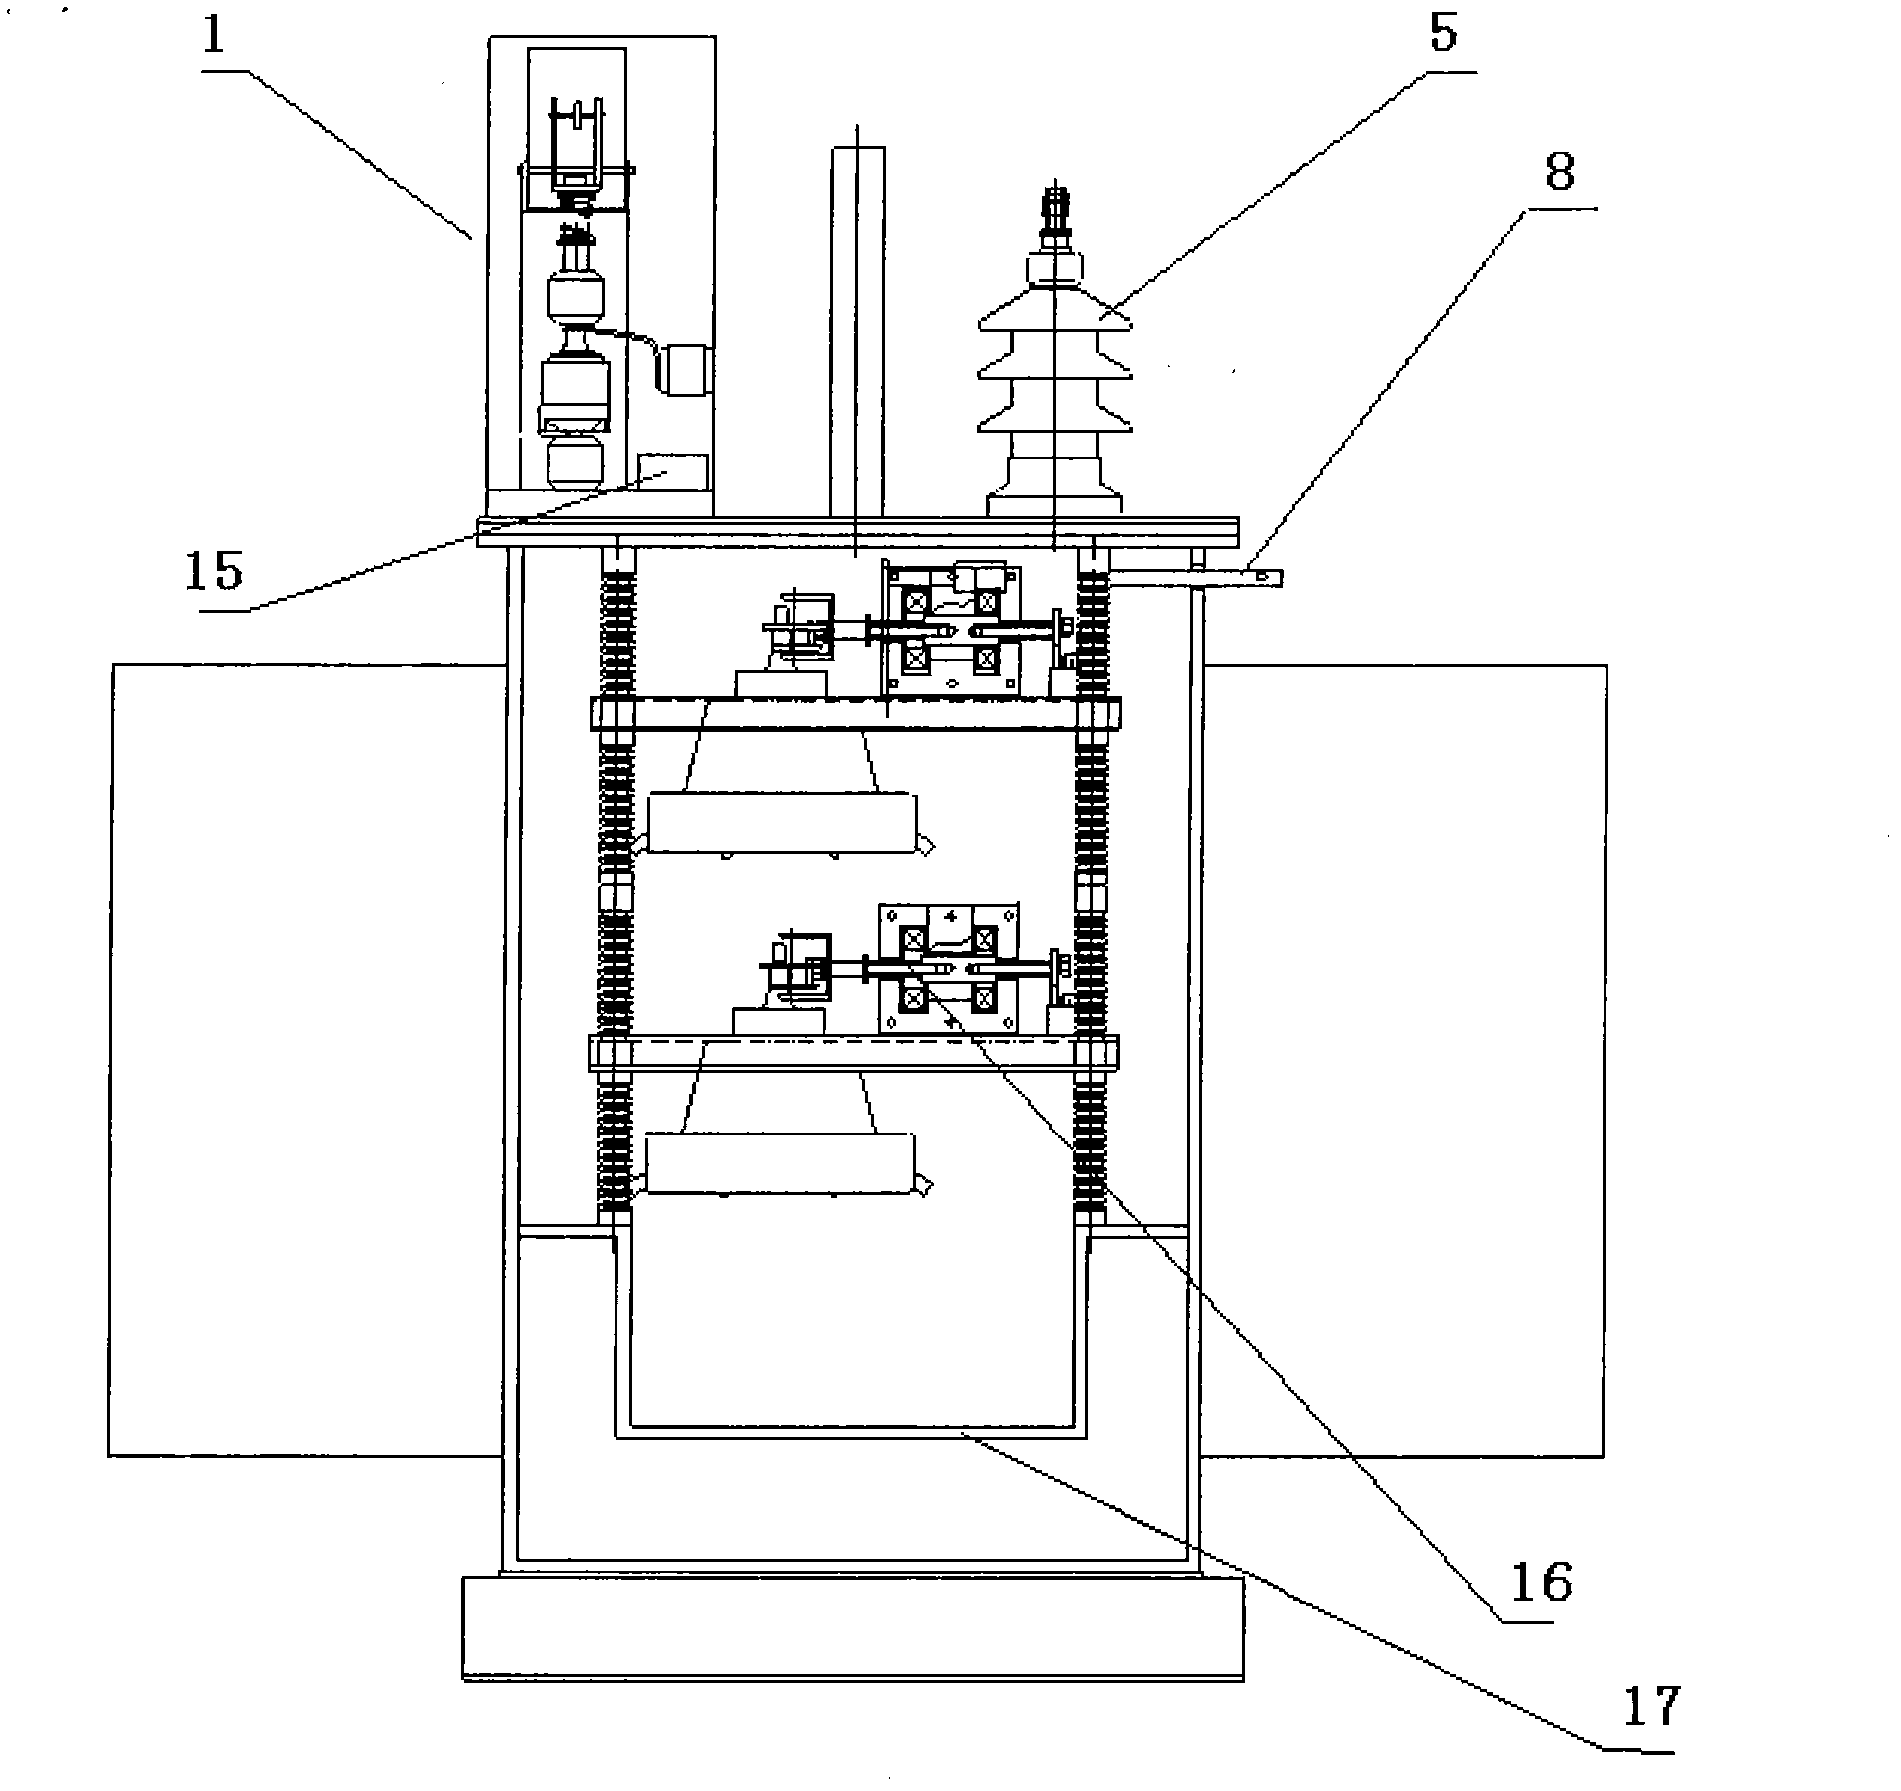 Distribution transformer capable of automatically adjusting capacitance and voltage